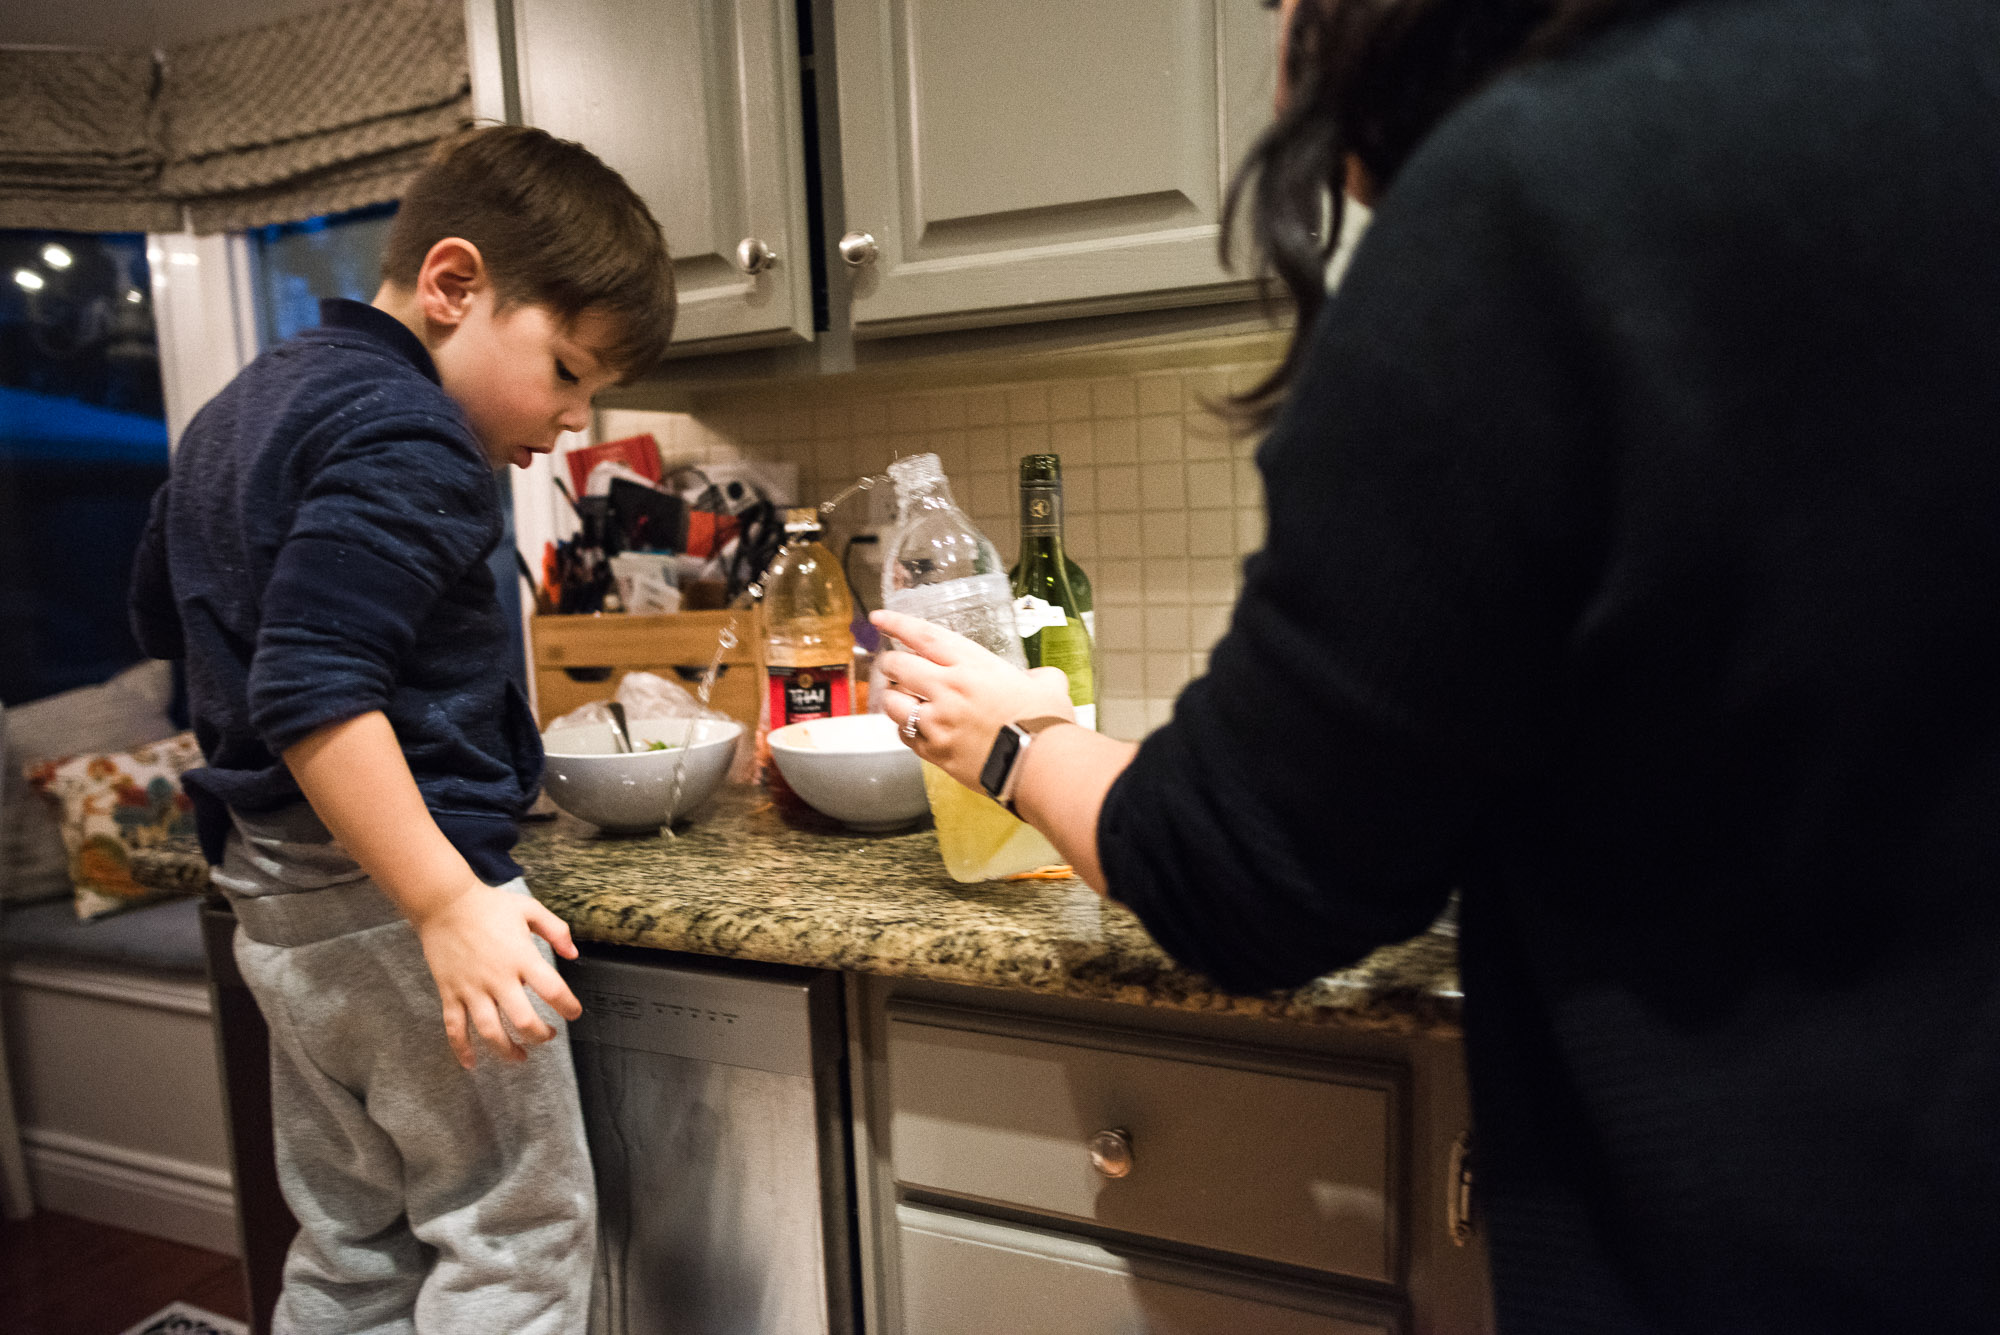 boy looks as mom catches spilling bottle in kitchen